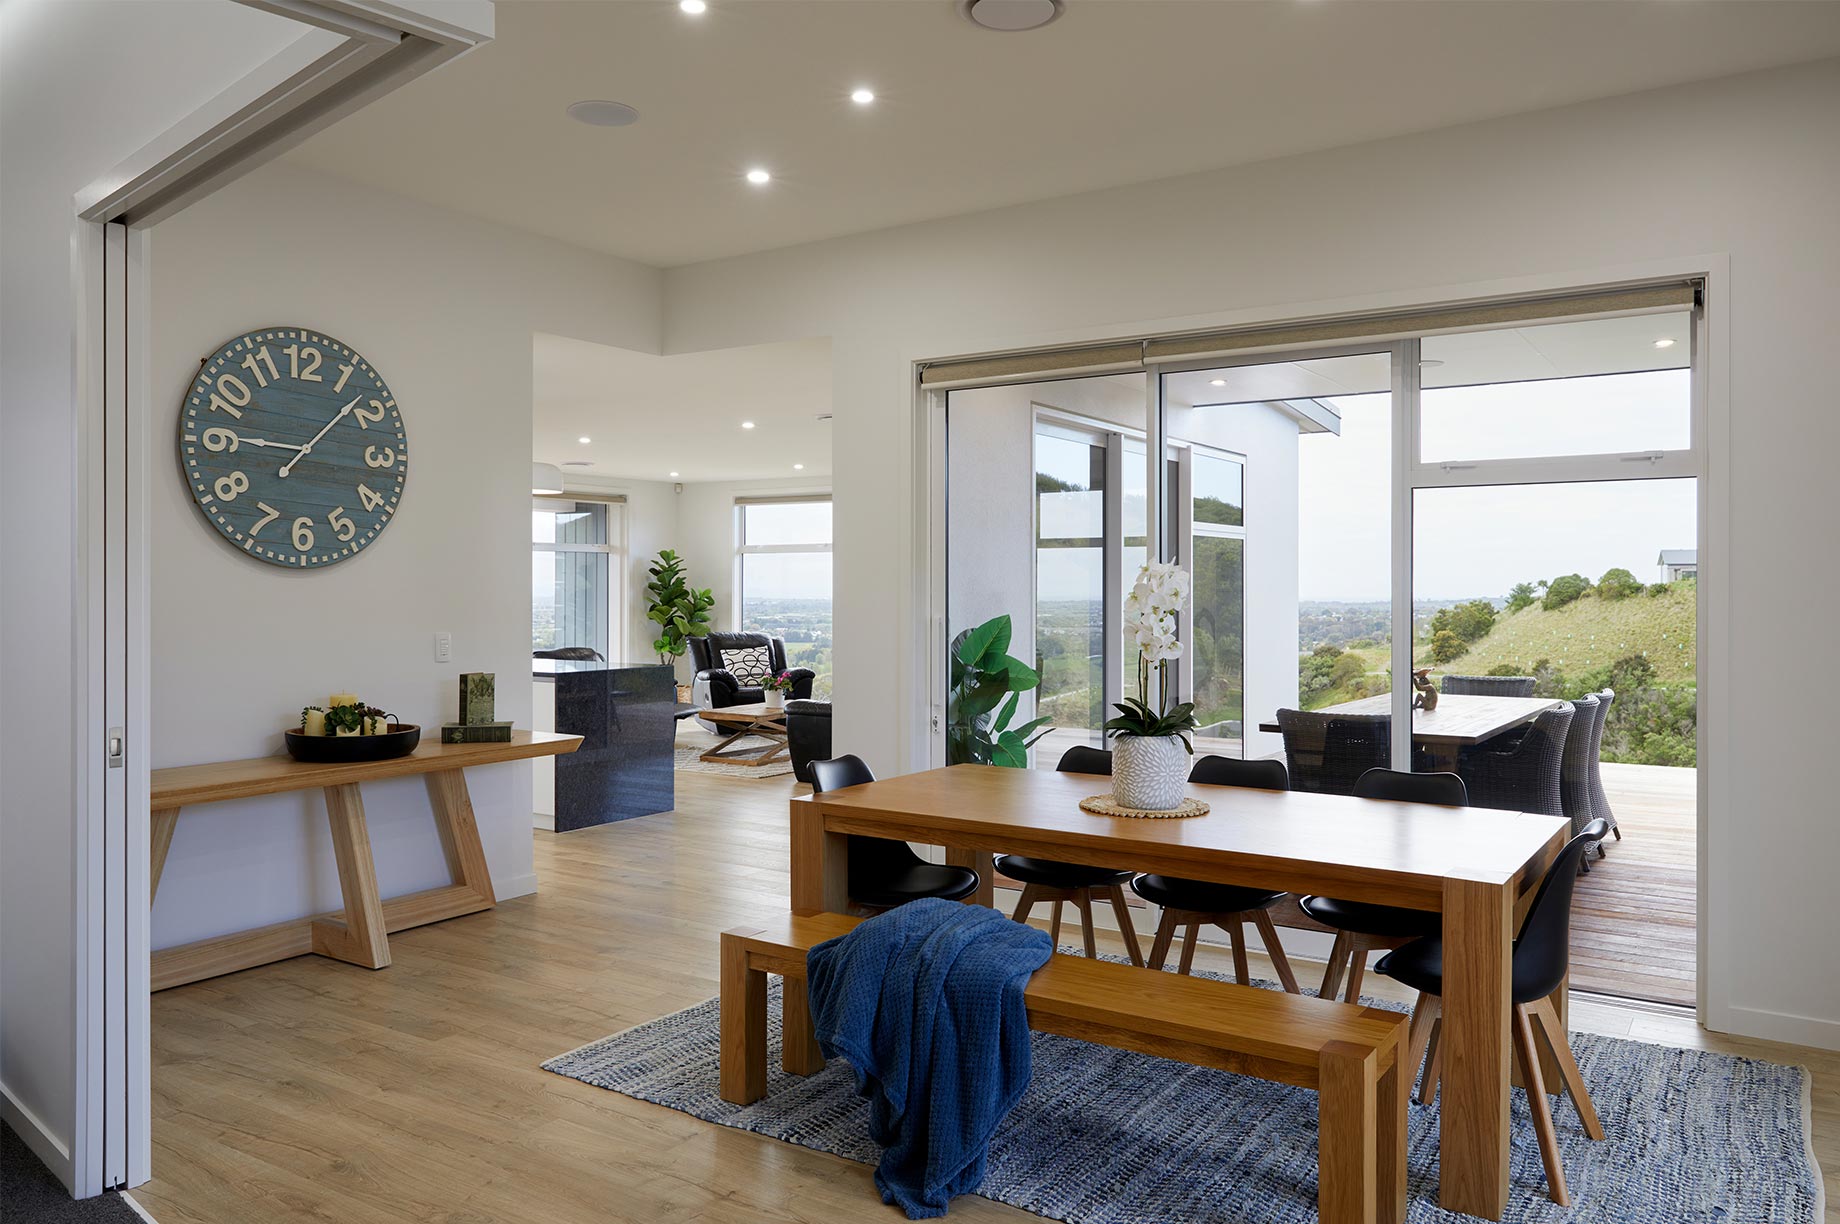 Dining area of a home in Hawkes Bay